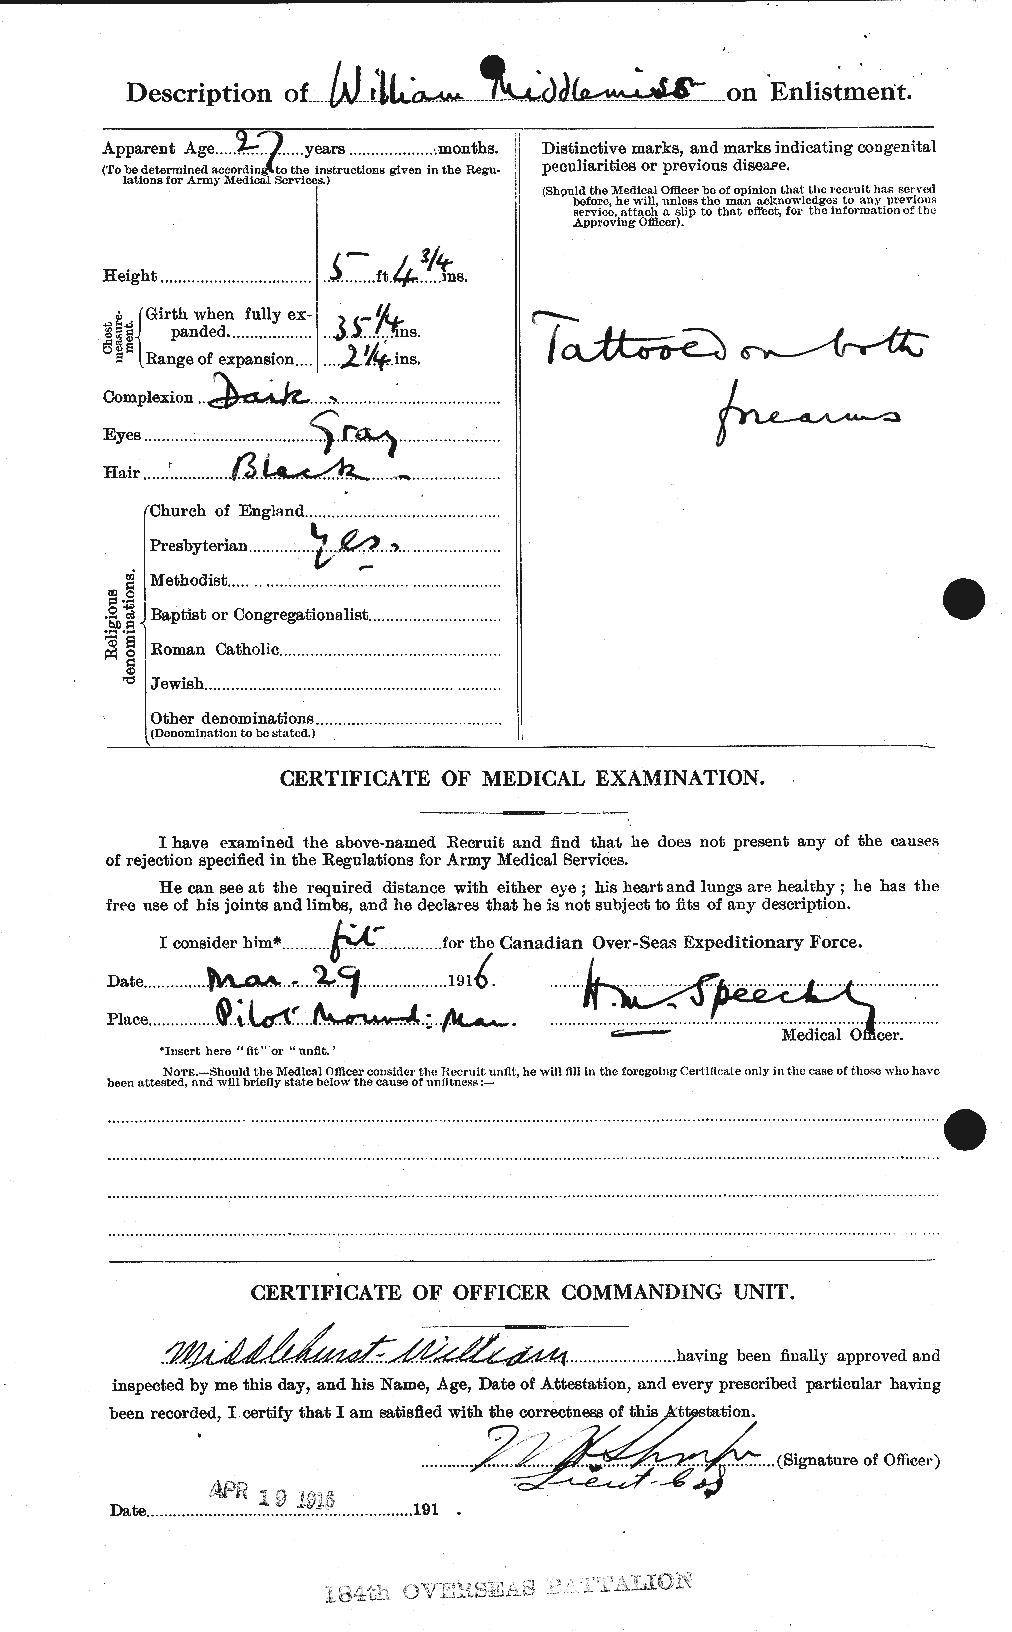 Personnel Records of the First World War - CEF 493011b